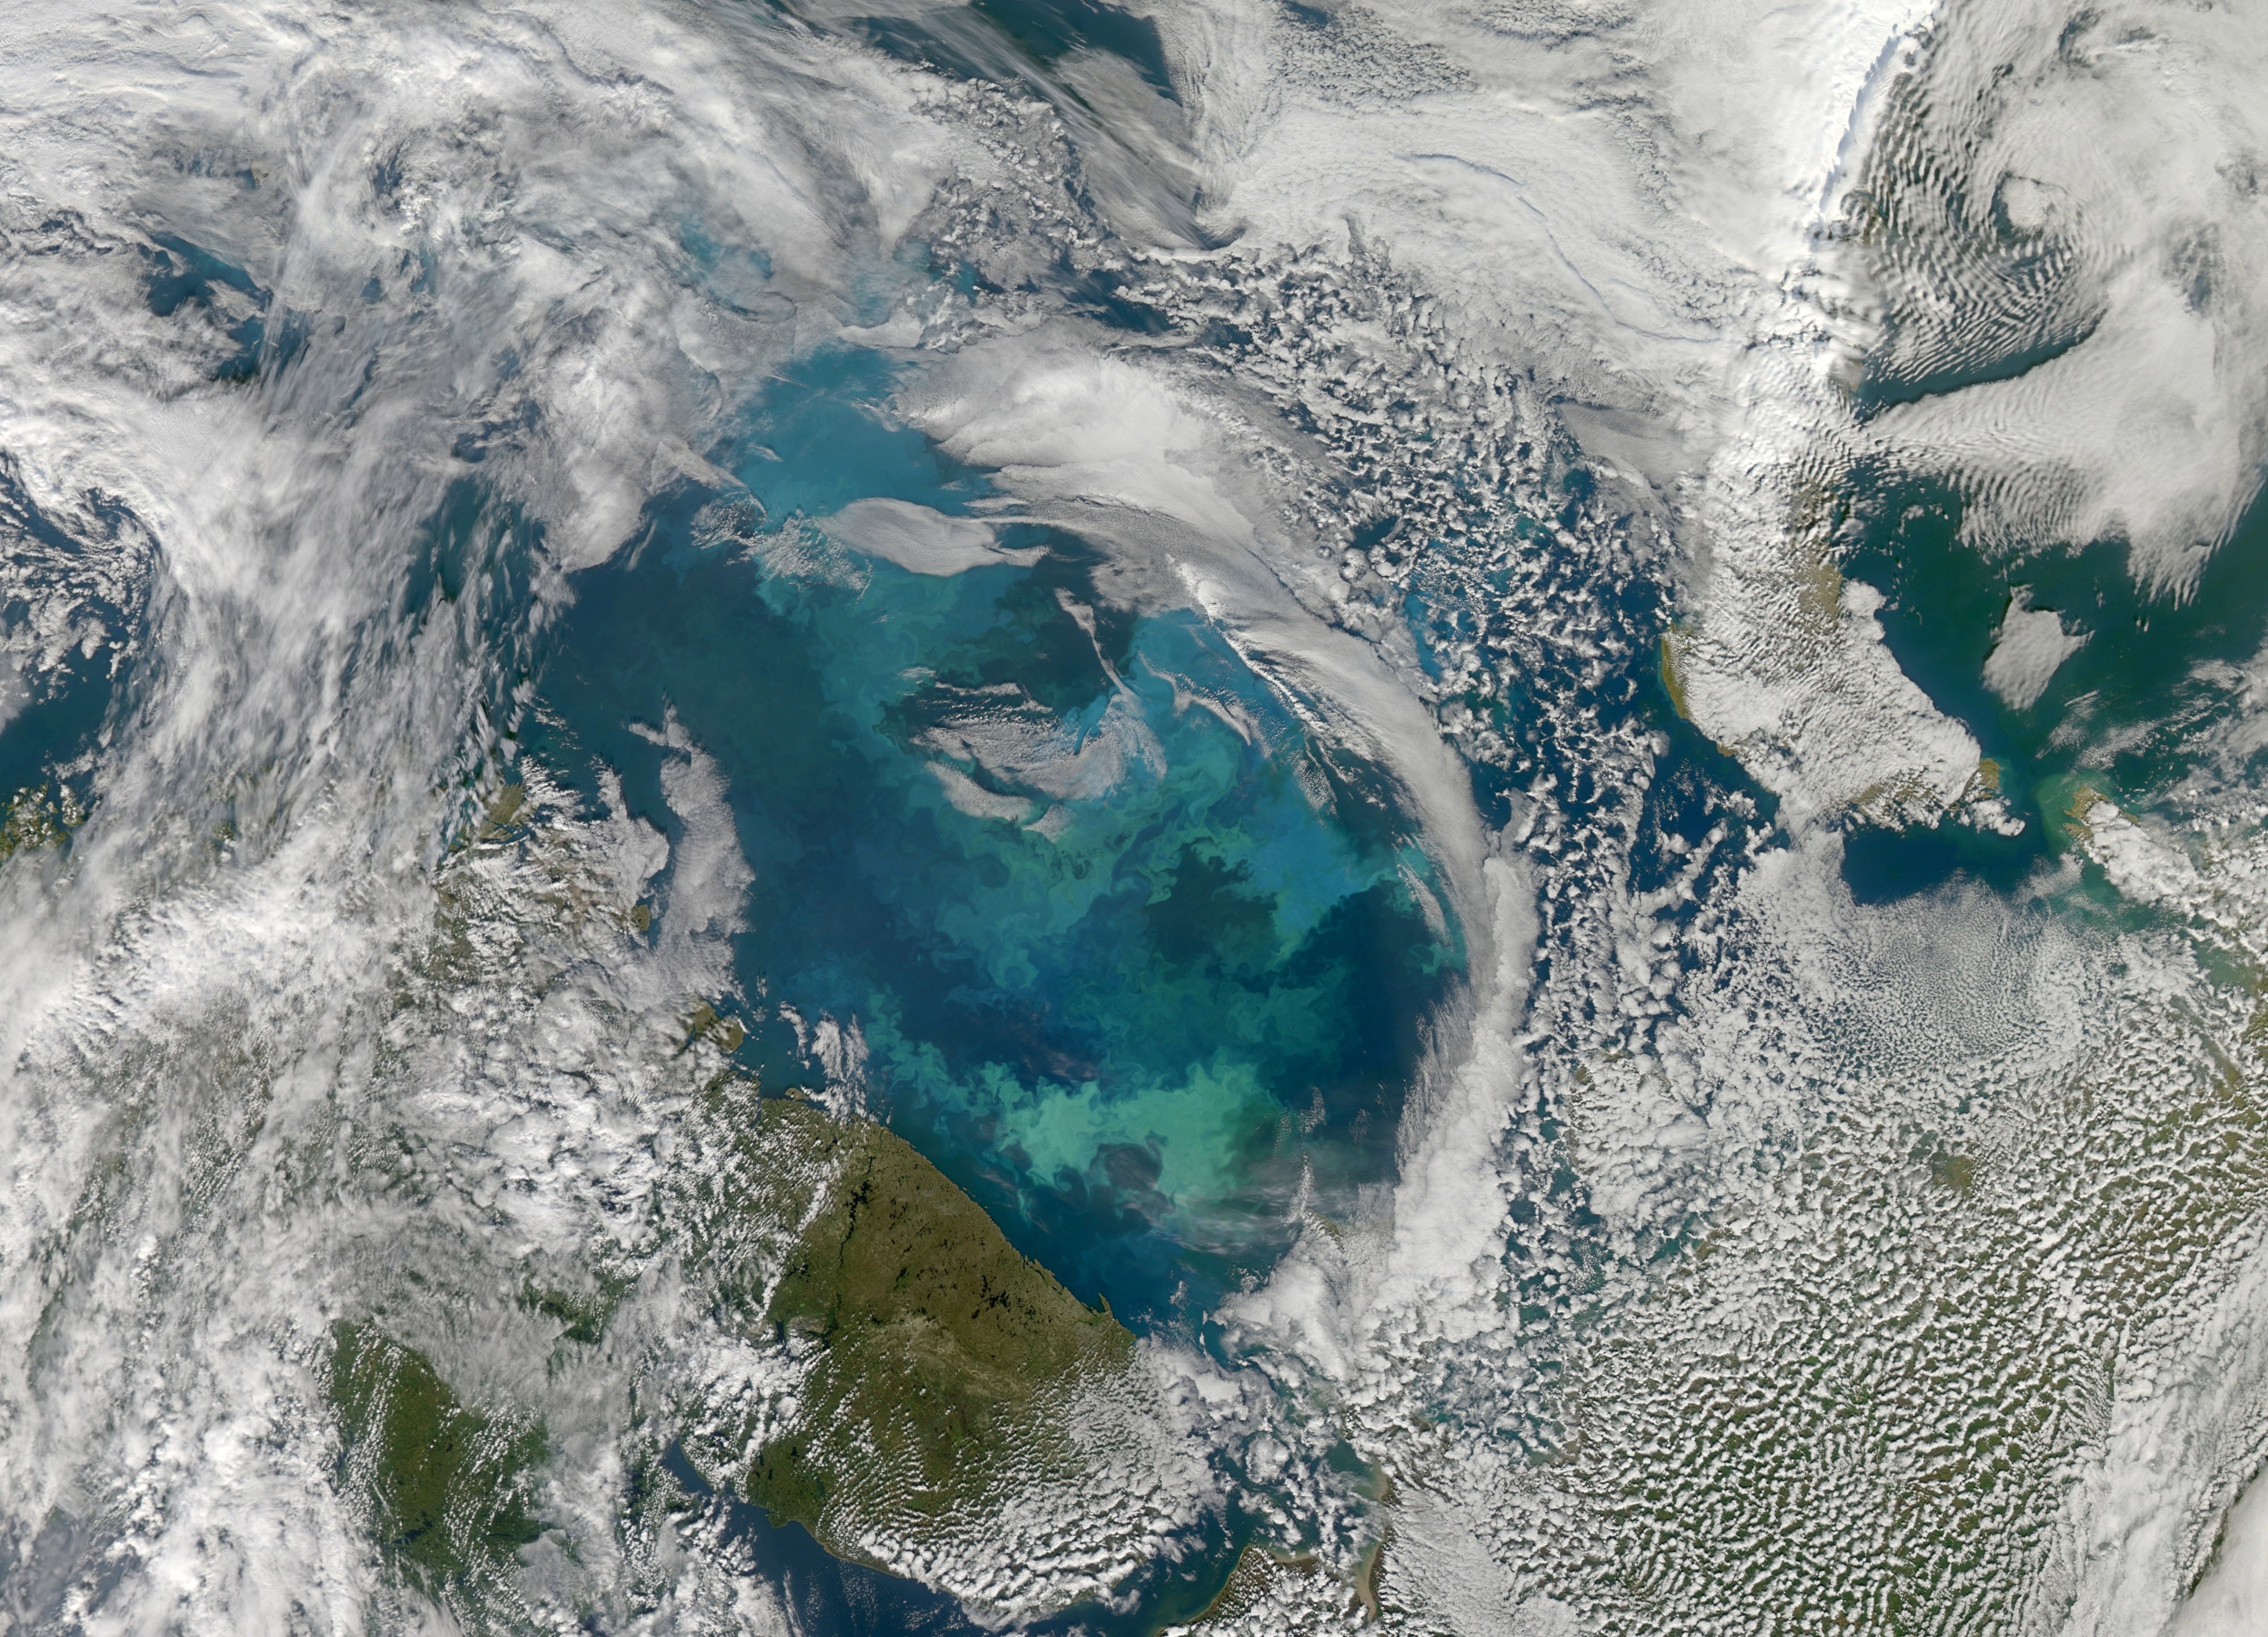 Phytoplankton Bloom in the Barents Sea